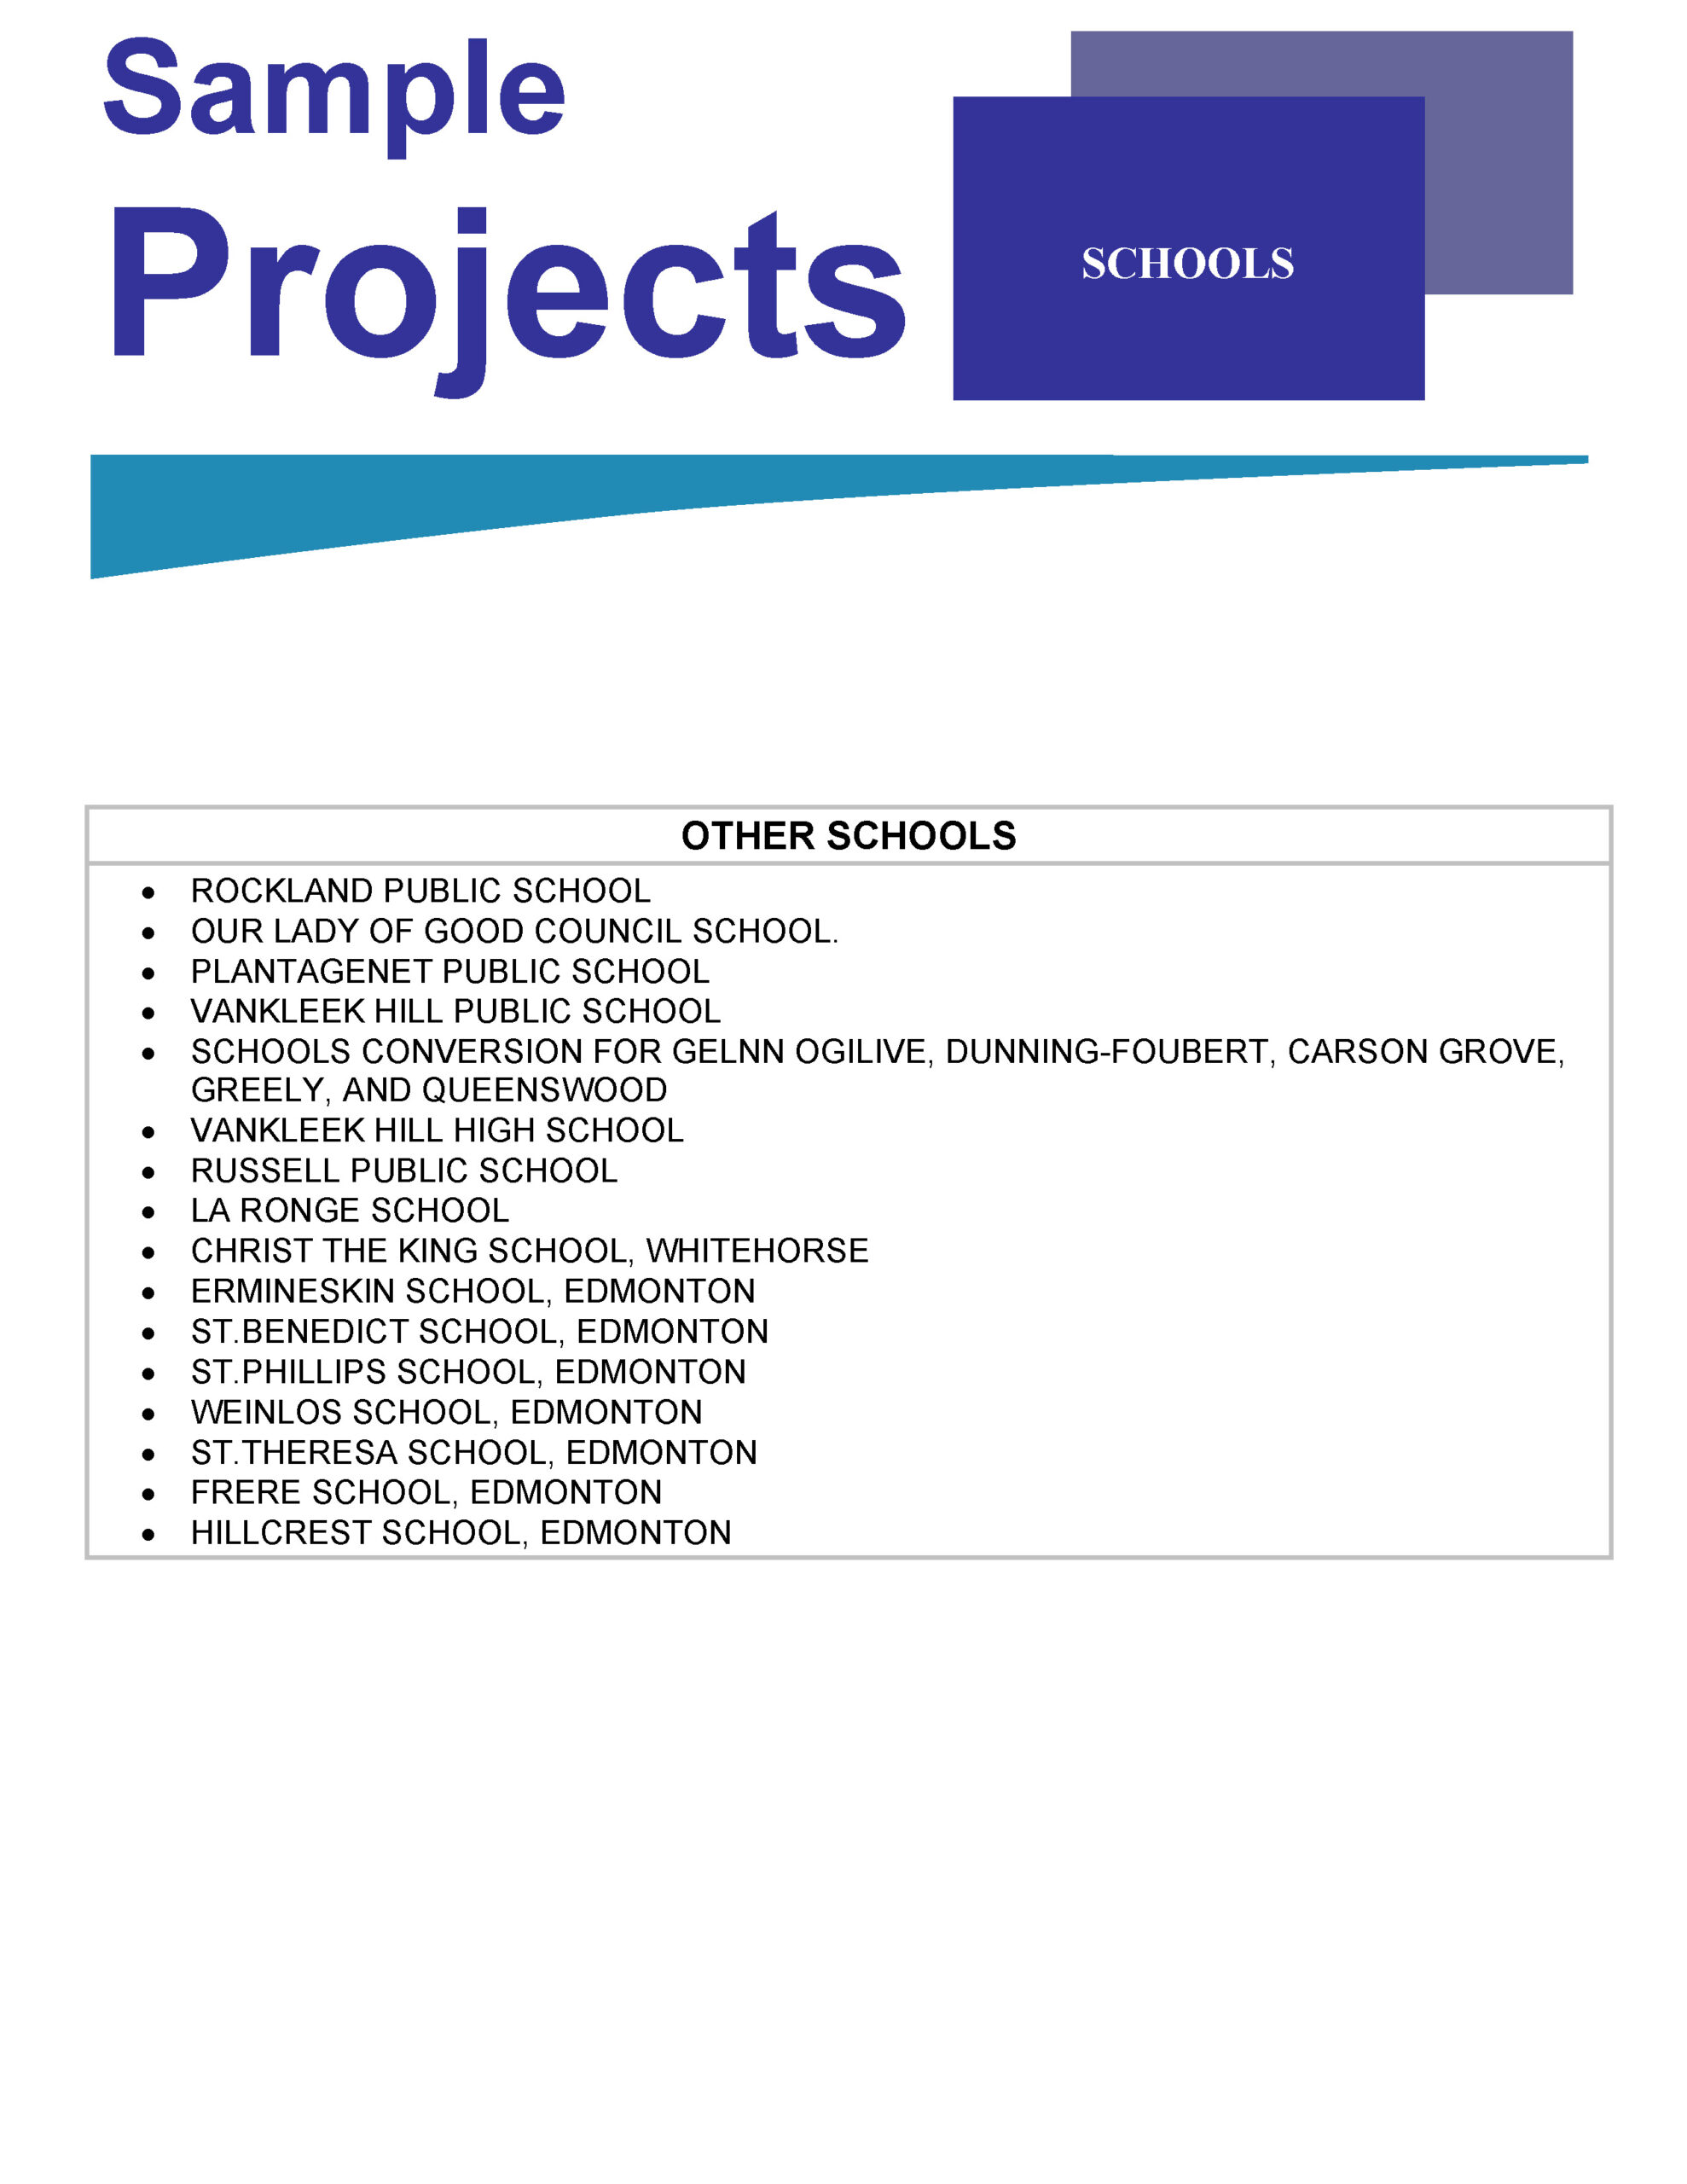 completed projects sampels 20222_Page_14